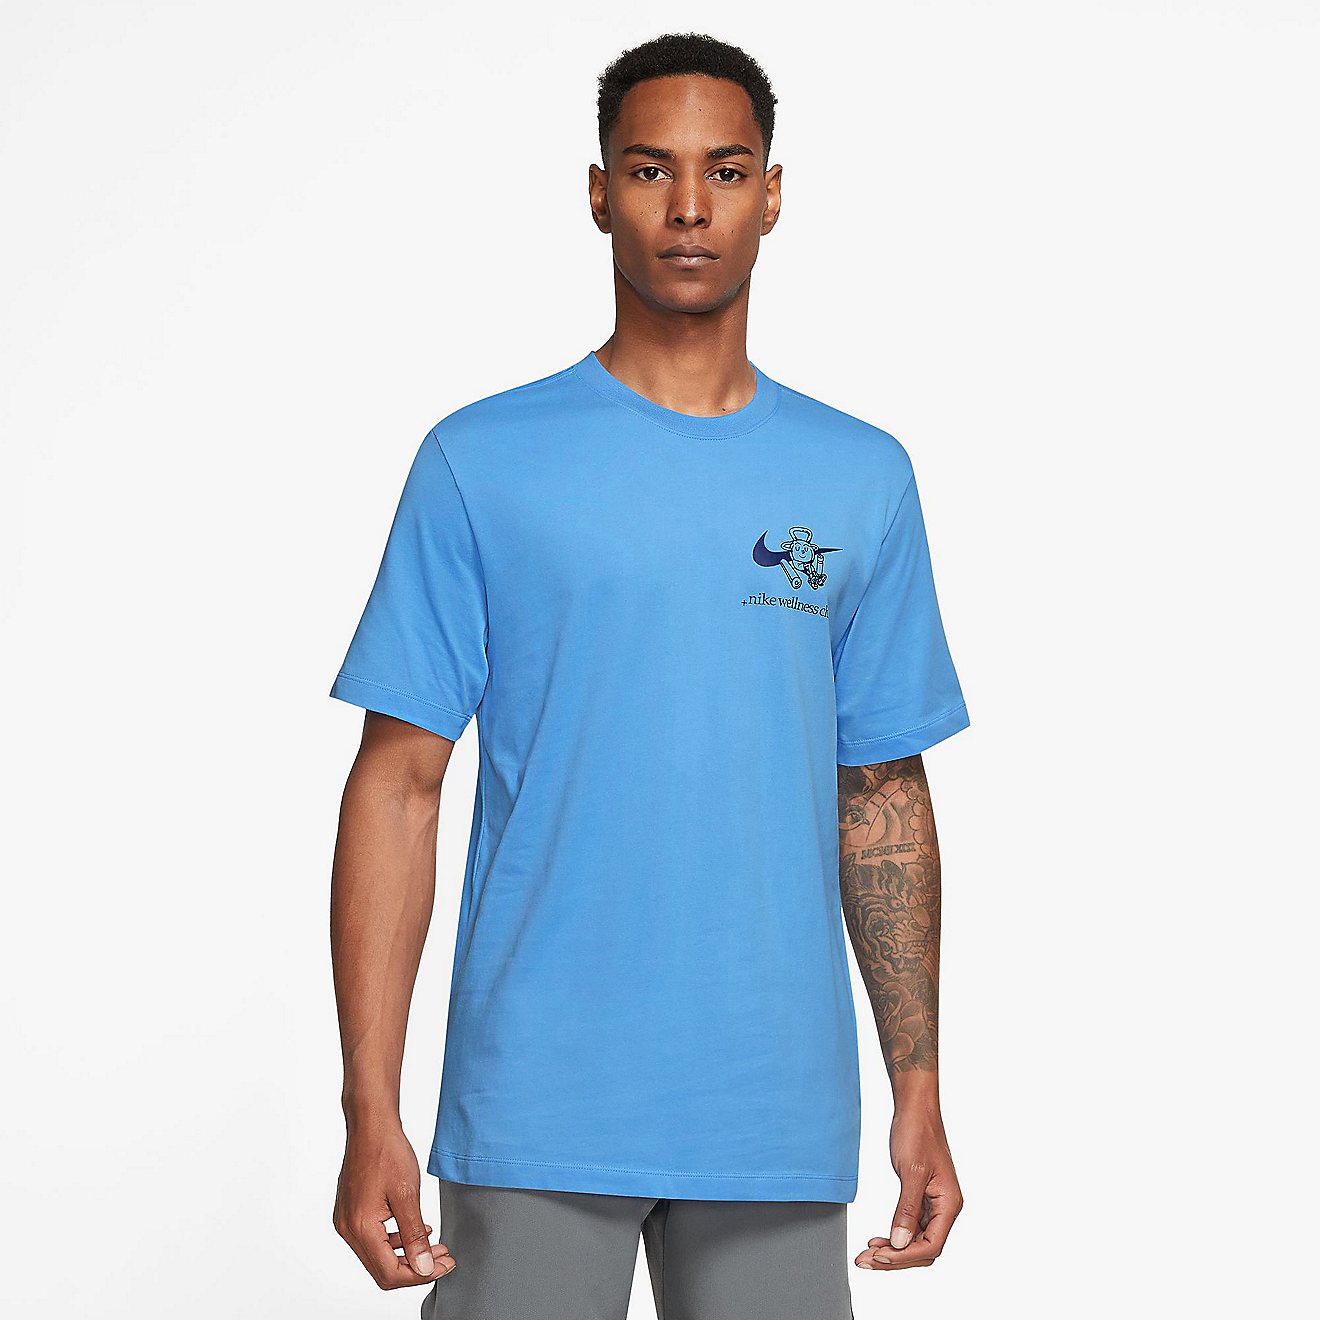 Nike Men's Dri-FIT Fitness T-shirt | Free Shipping at Academy